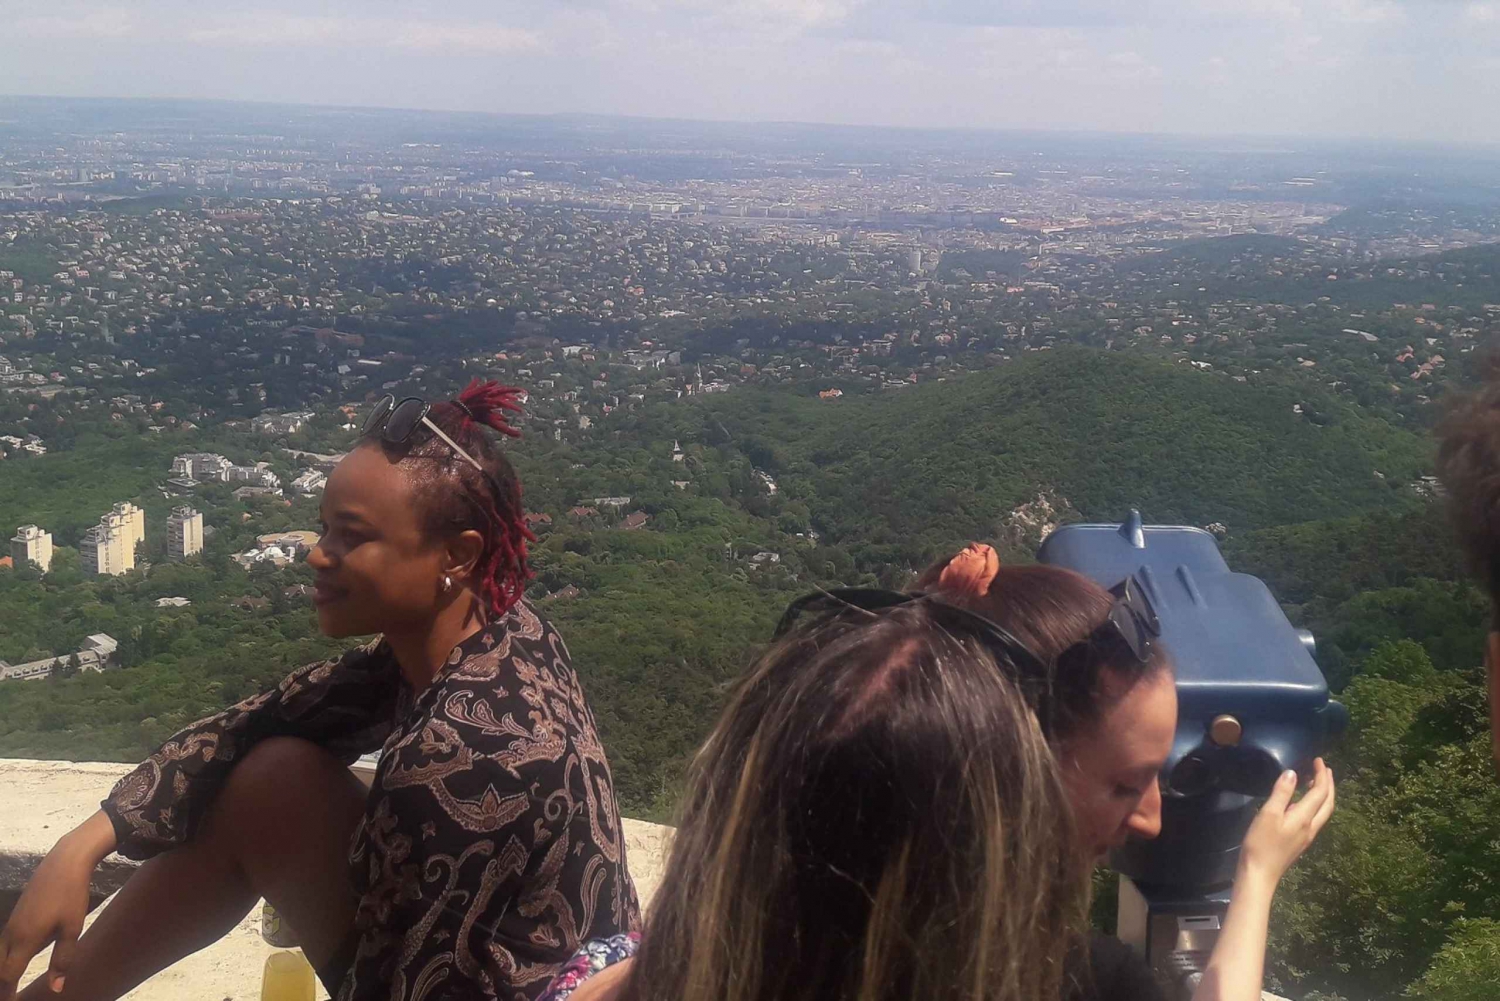 Budapest: Elisabeth Lookout Tower Chairlift Ticket and Tour